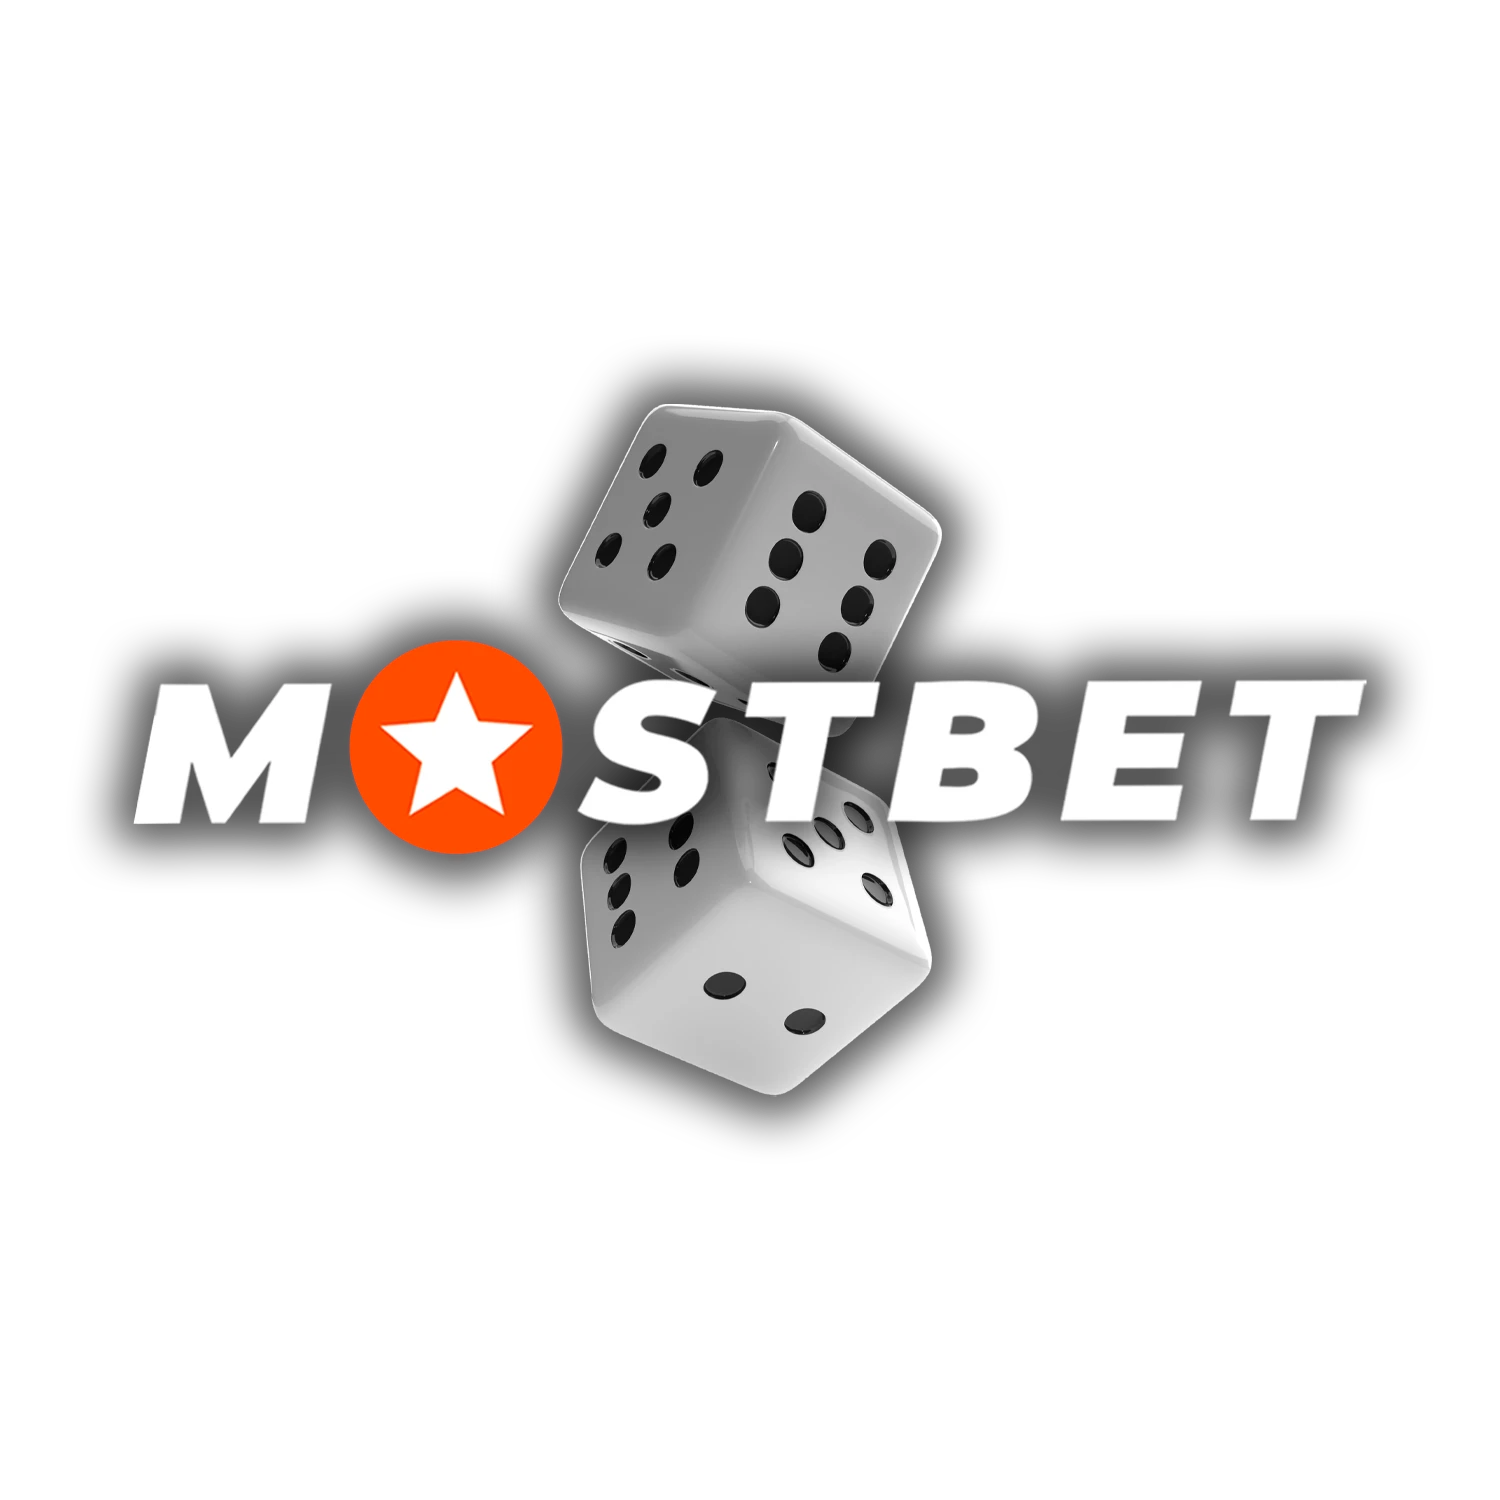 Find out more about responsible gaming rules at Mostbet.